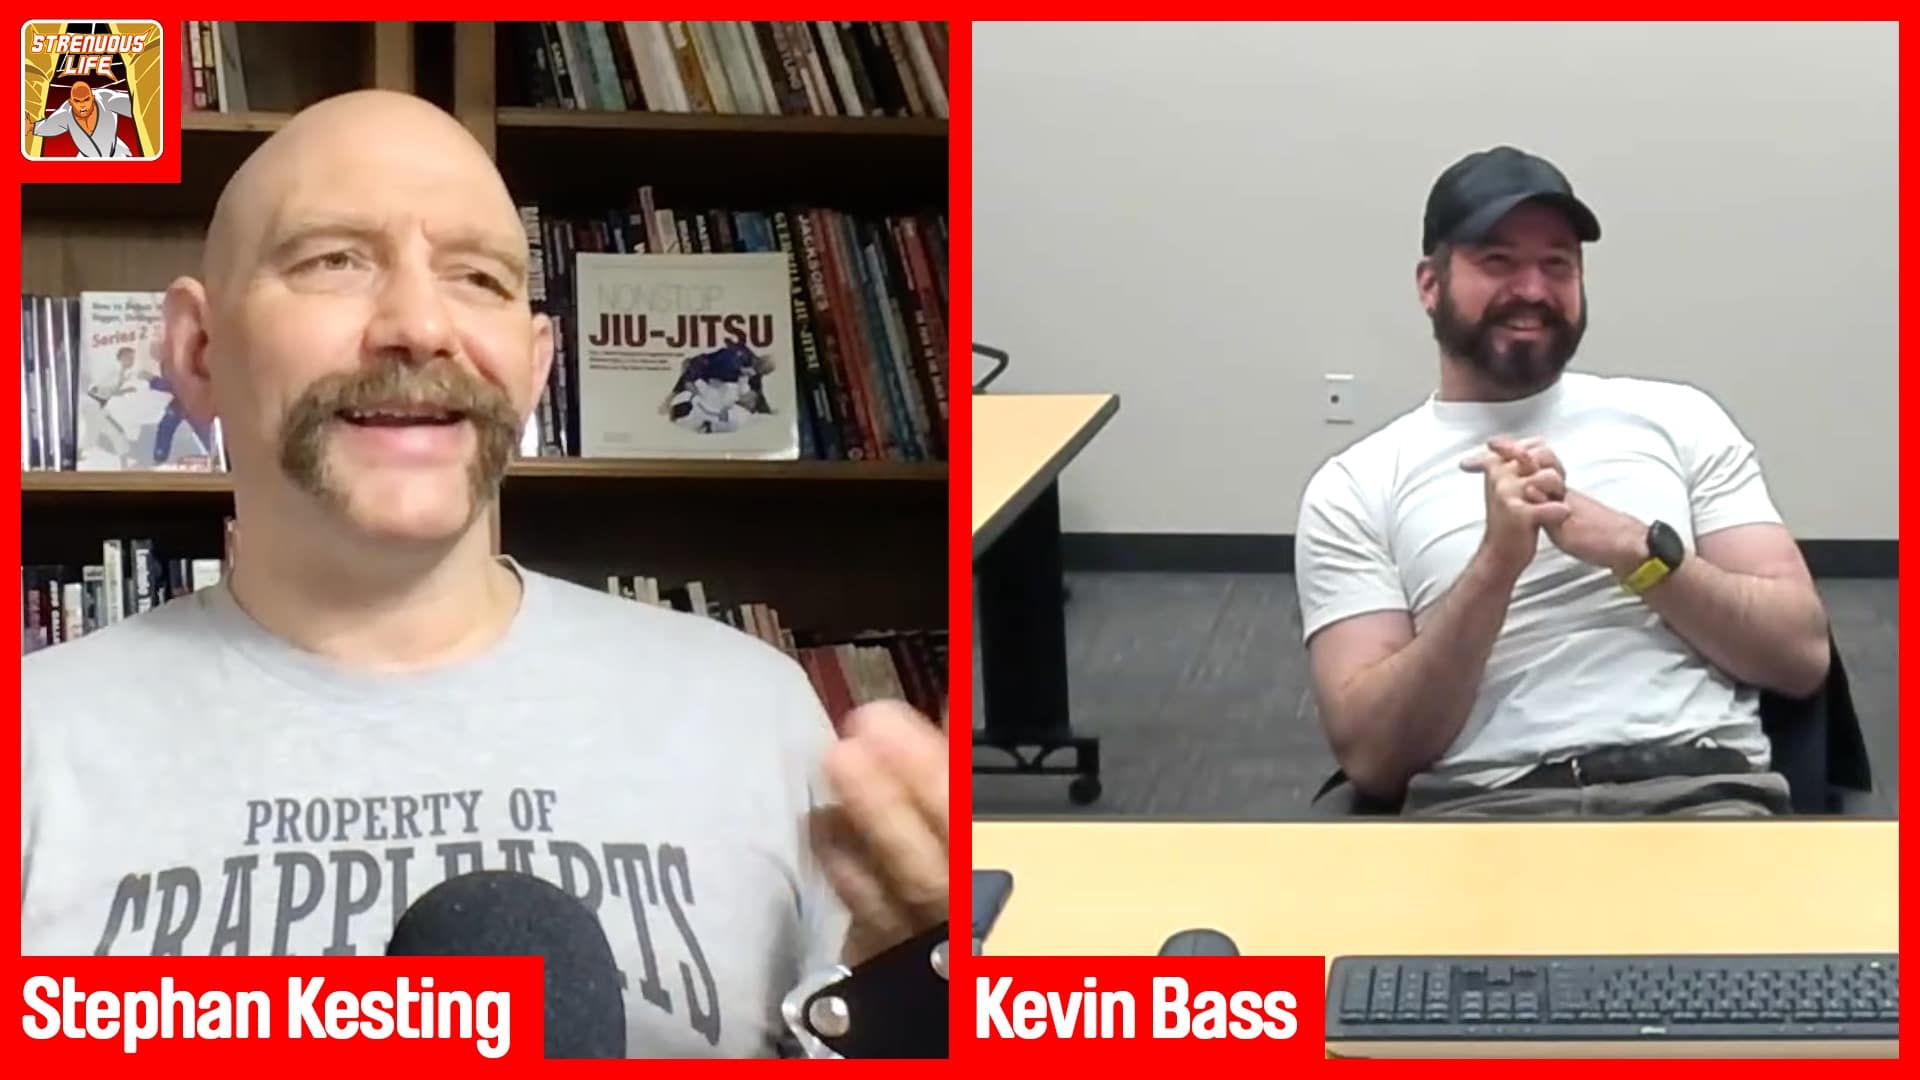 Keto and Carnivore Diets - Kevin Bass